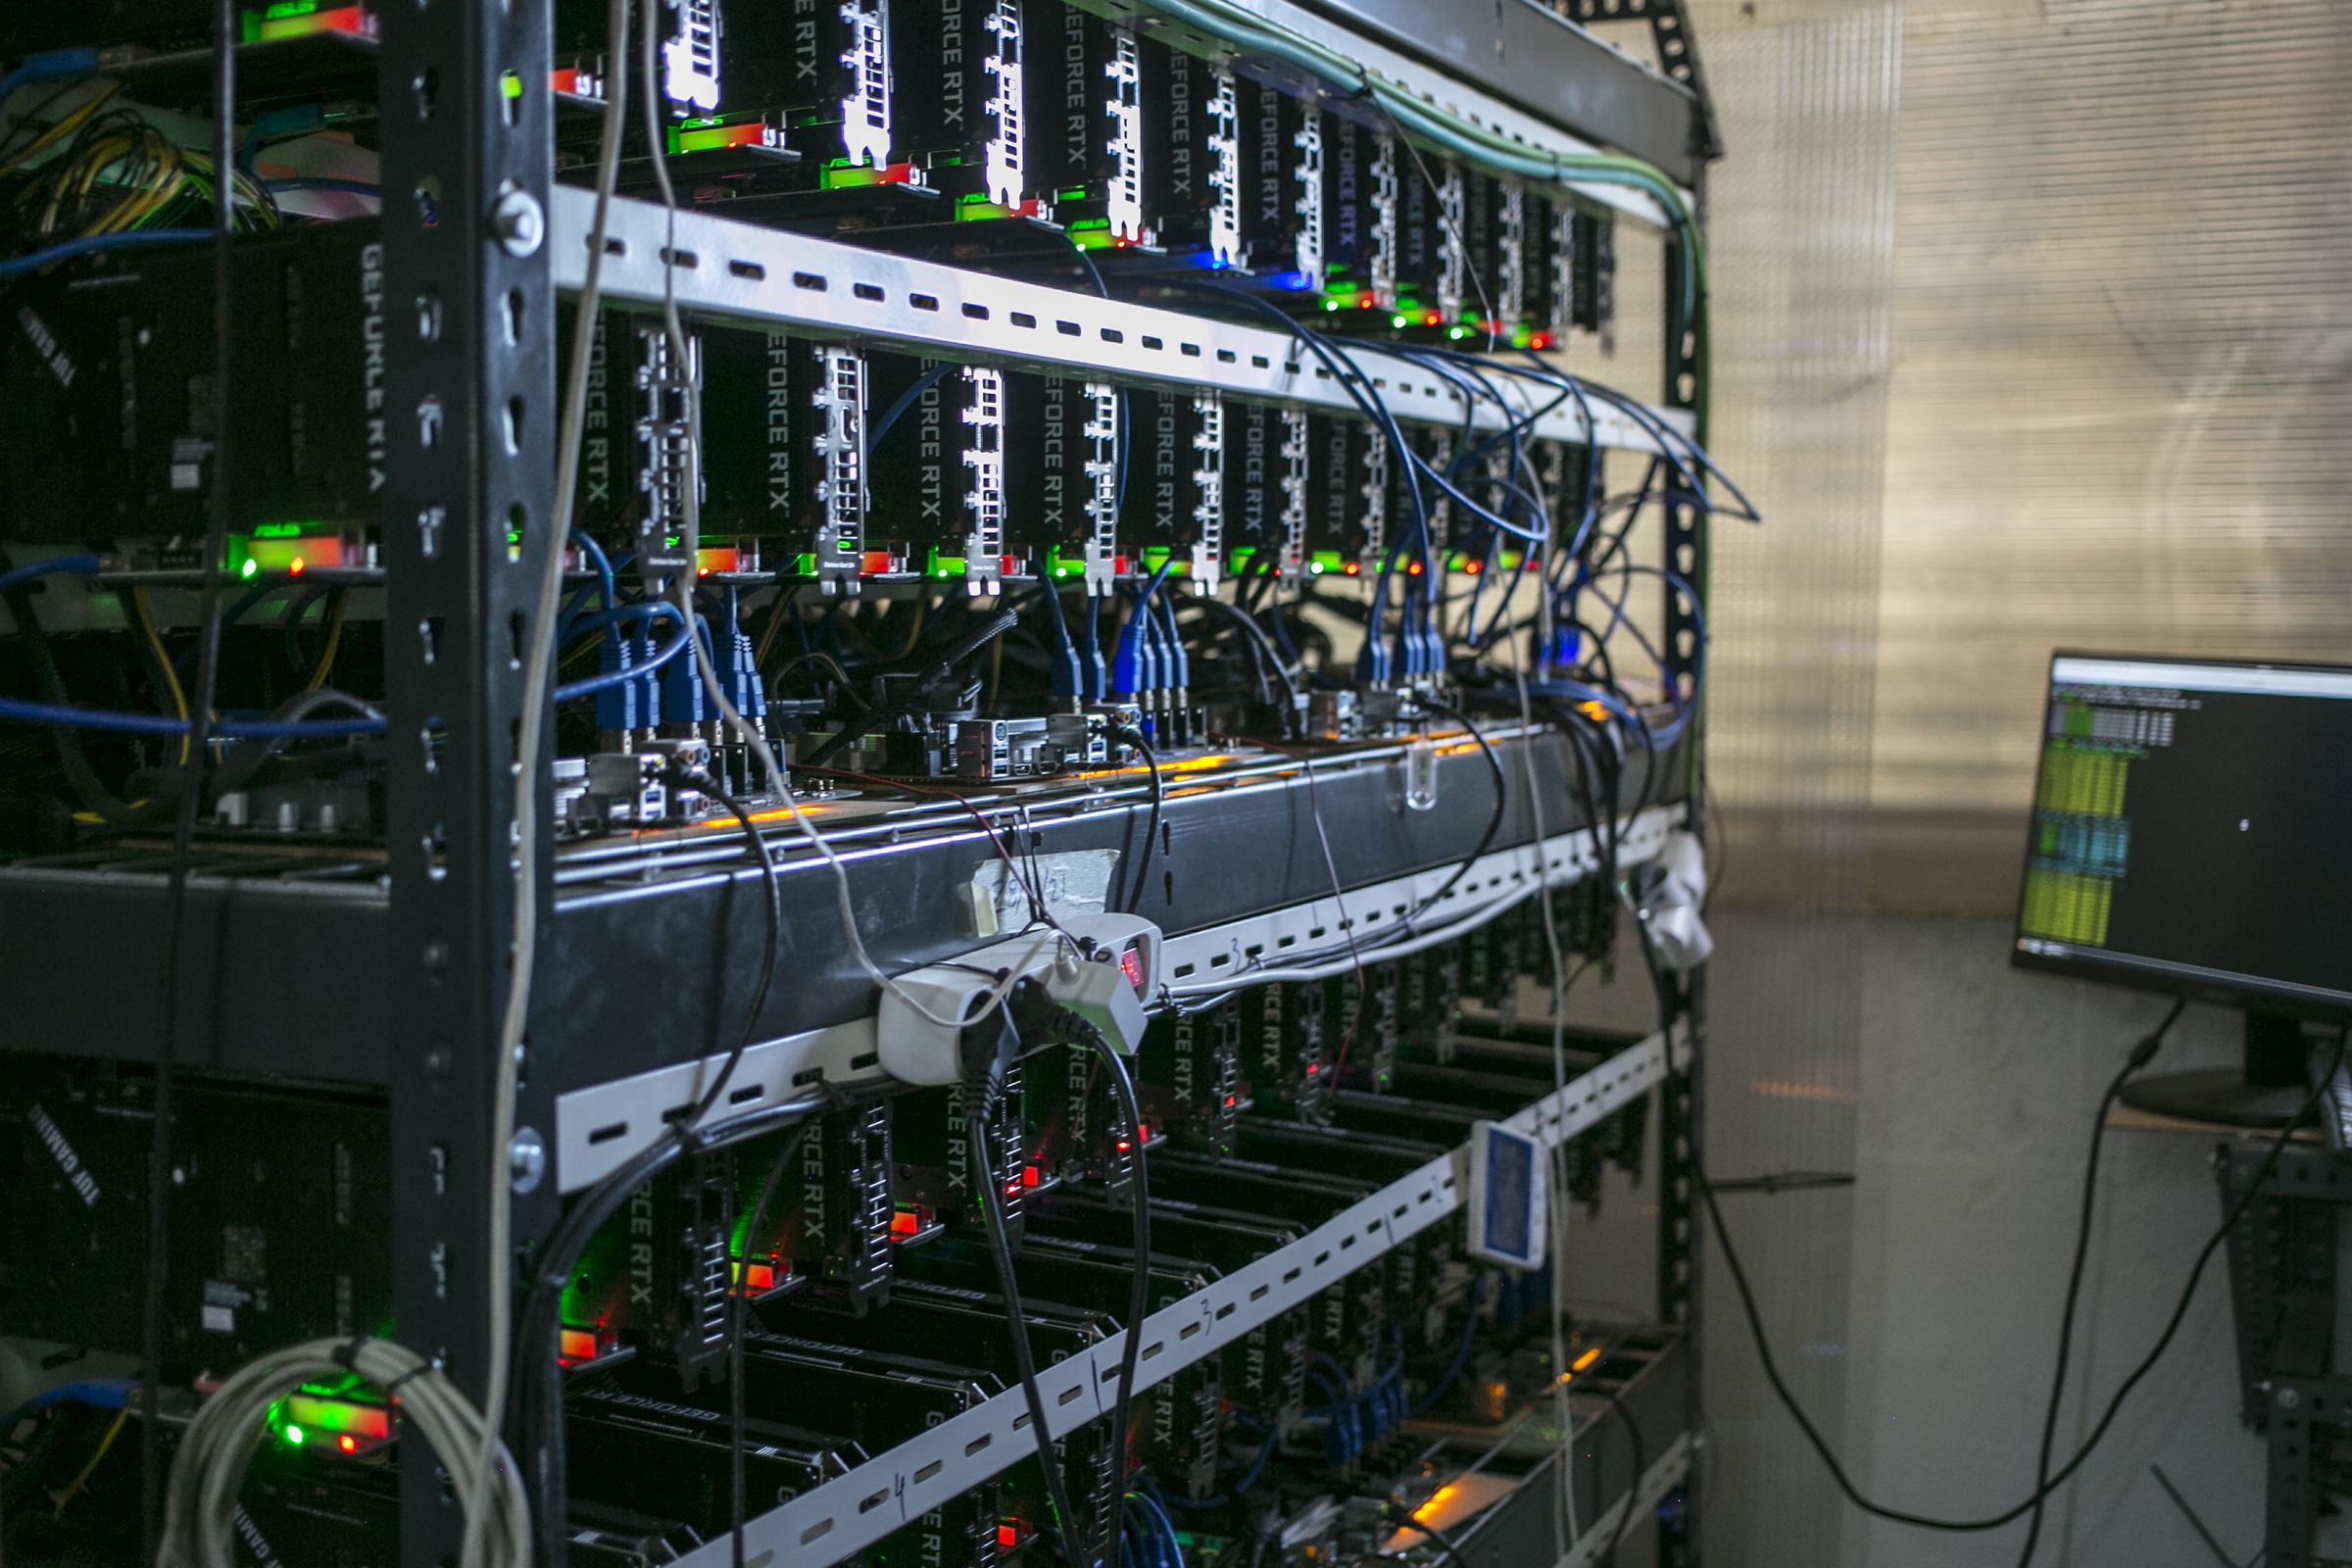 Computer equipment used by a miner at an Ethereum Cryptocurrency Farm